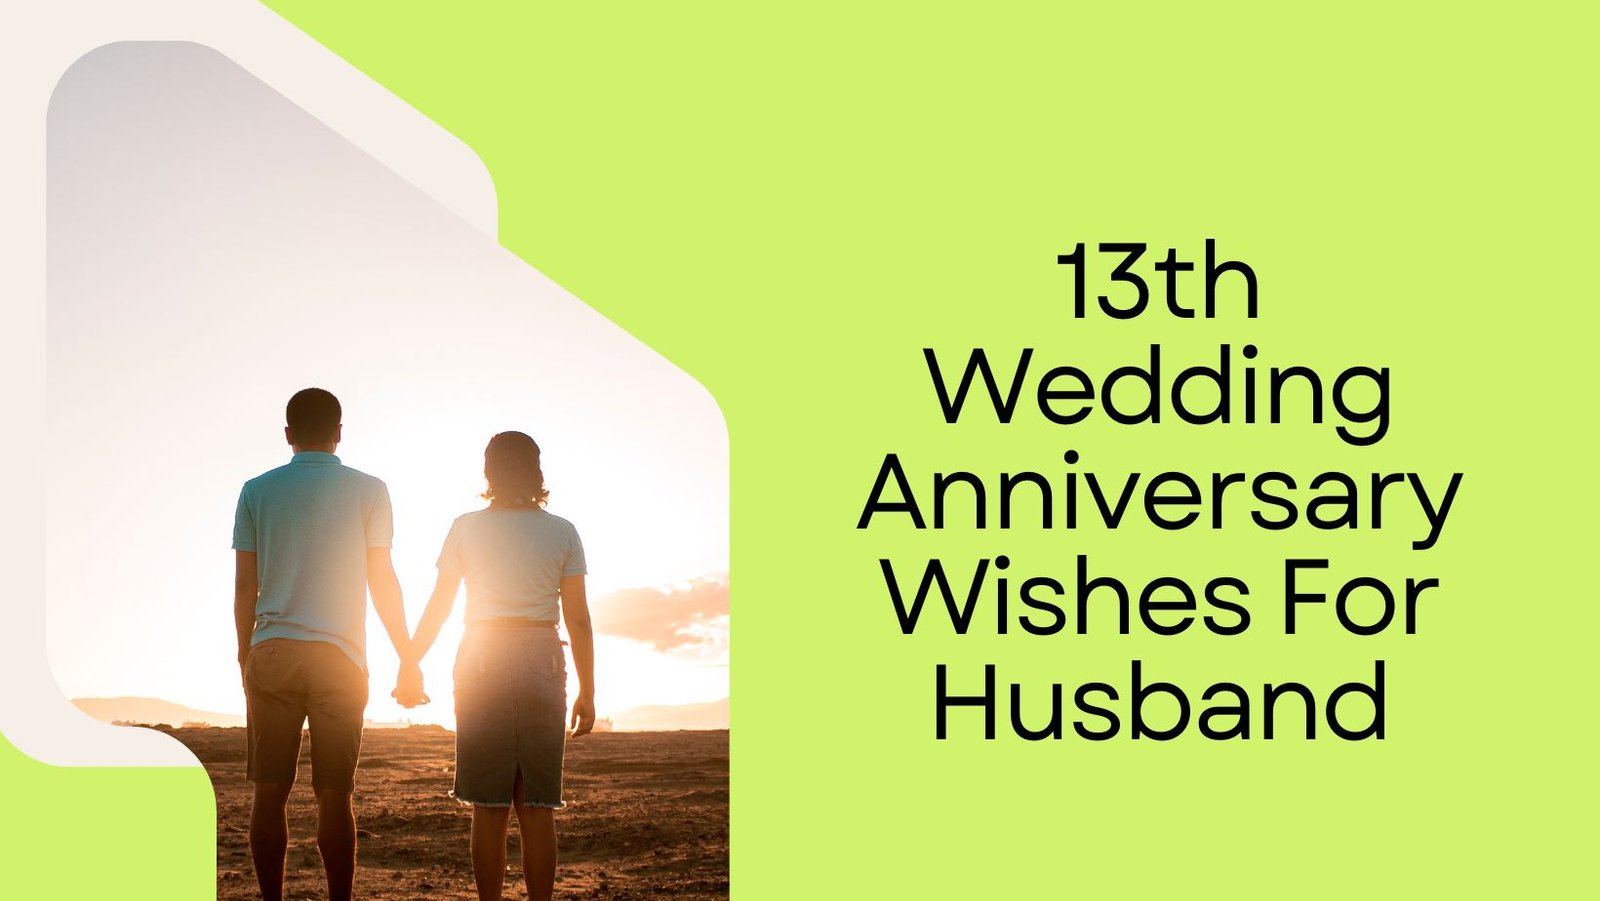 Happy 8th Wedding Anniversary Wishes For Husband - Wishes2Quotes